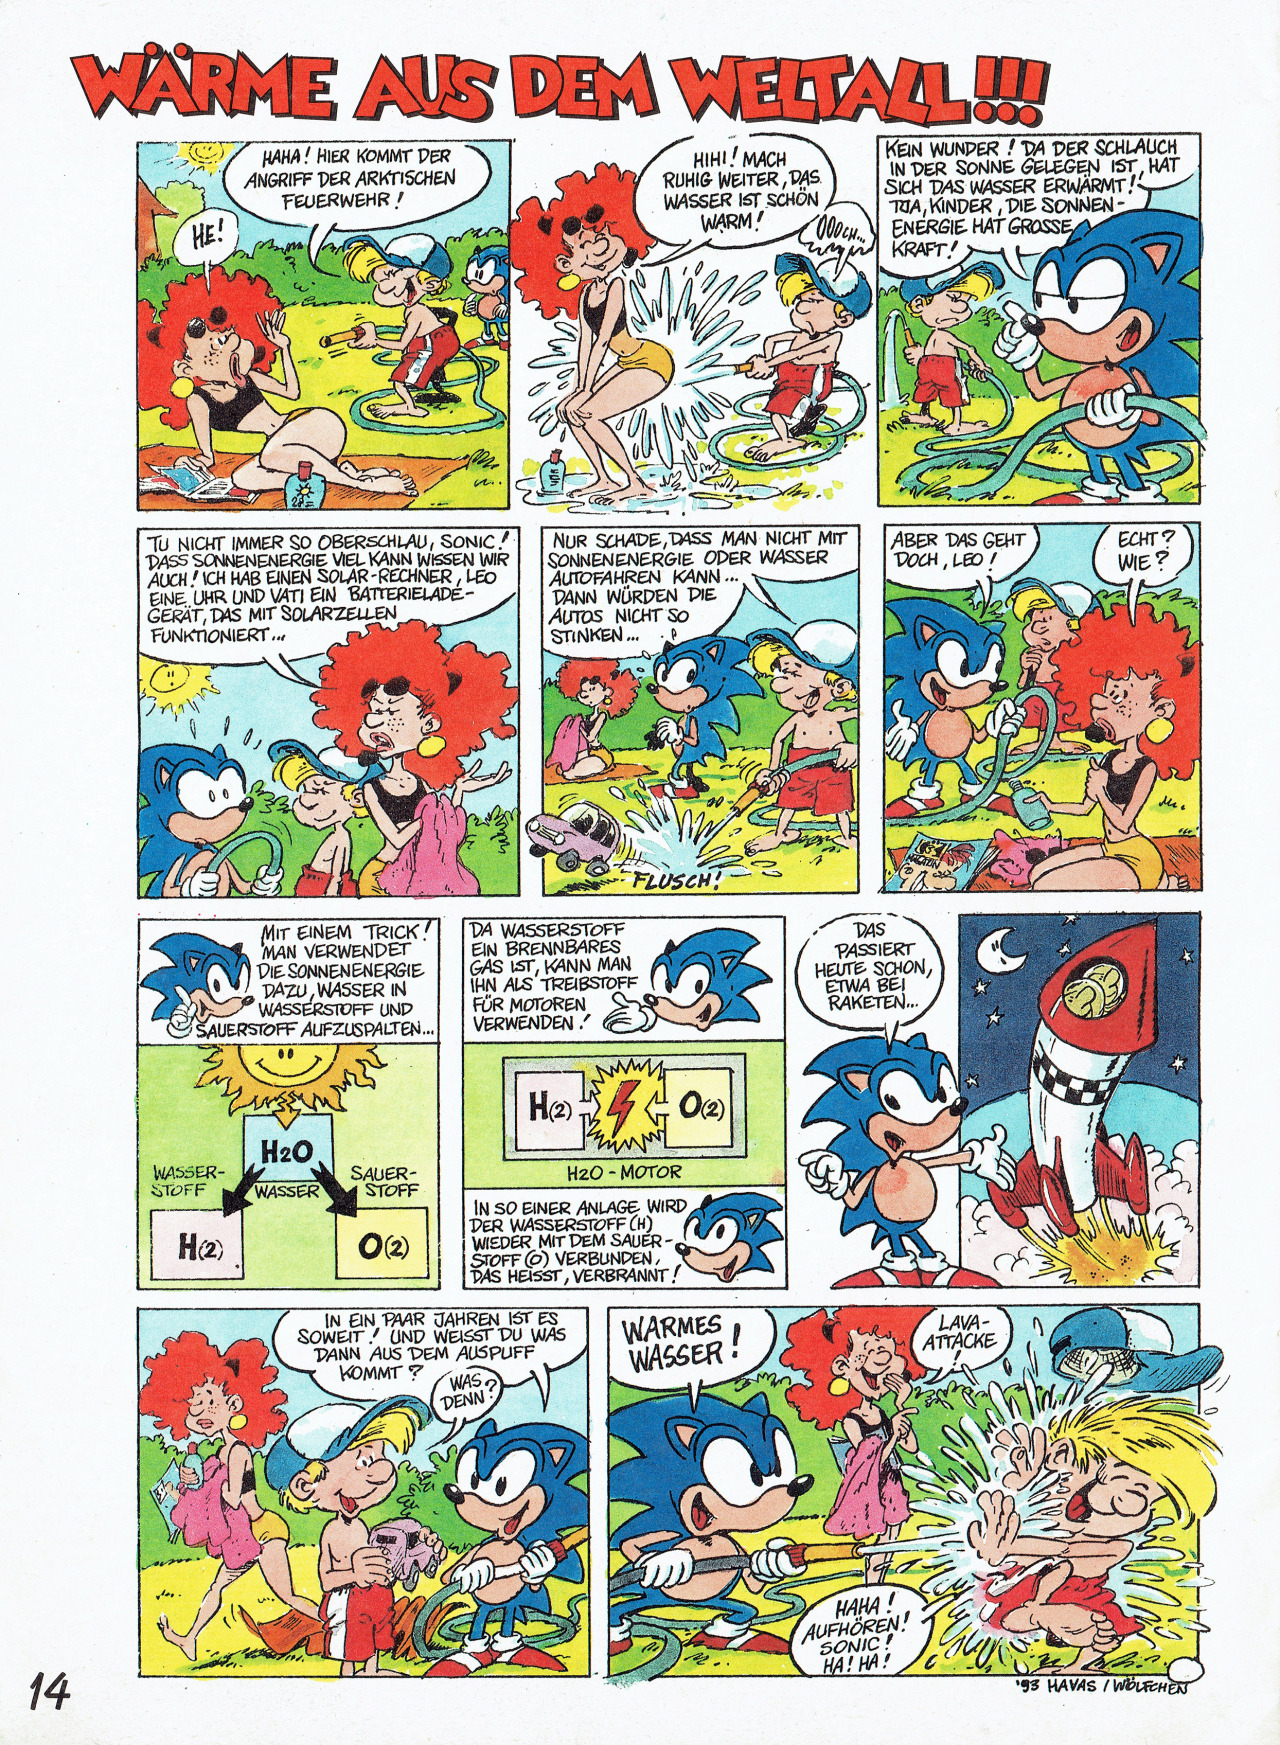 An Austrian comic from ‘Energie Verwenden Statt Verschwende’, The comic-booklet was released in conjunction with the Austria’s Ministry for the Environment, where Sonic helps people to conserve energy.